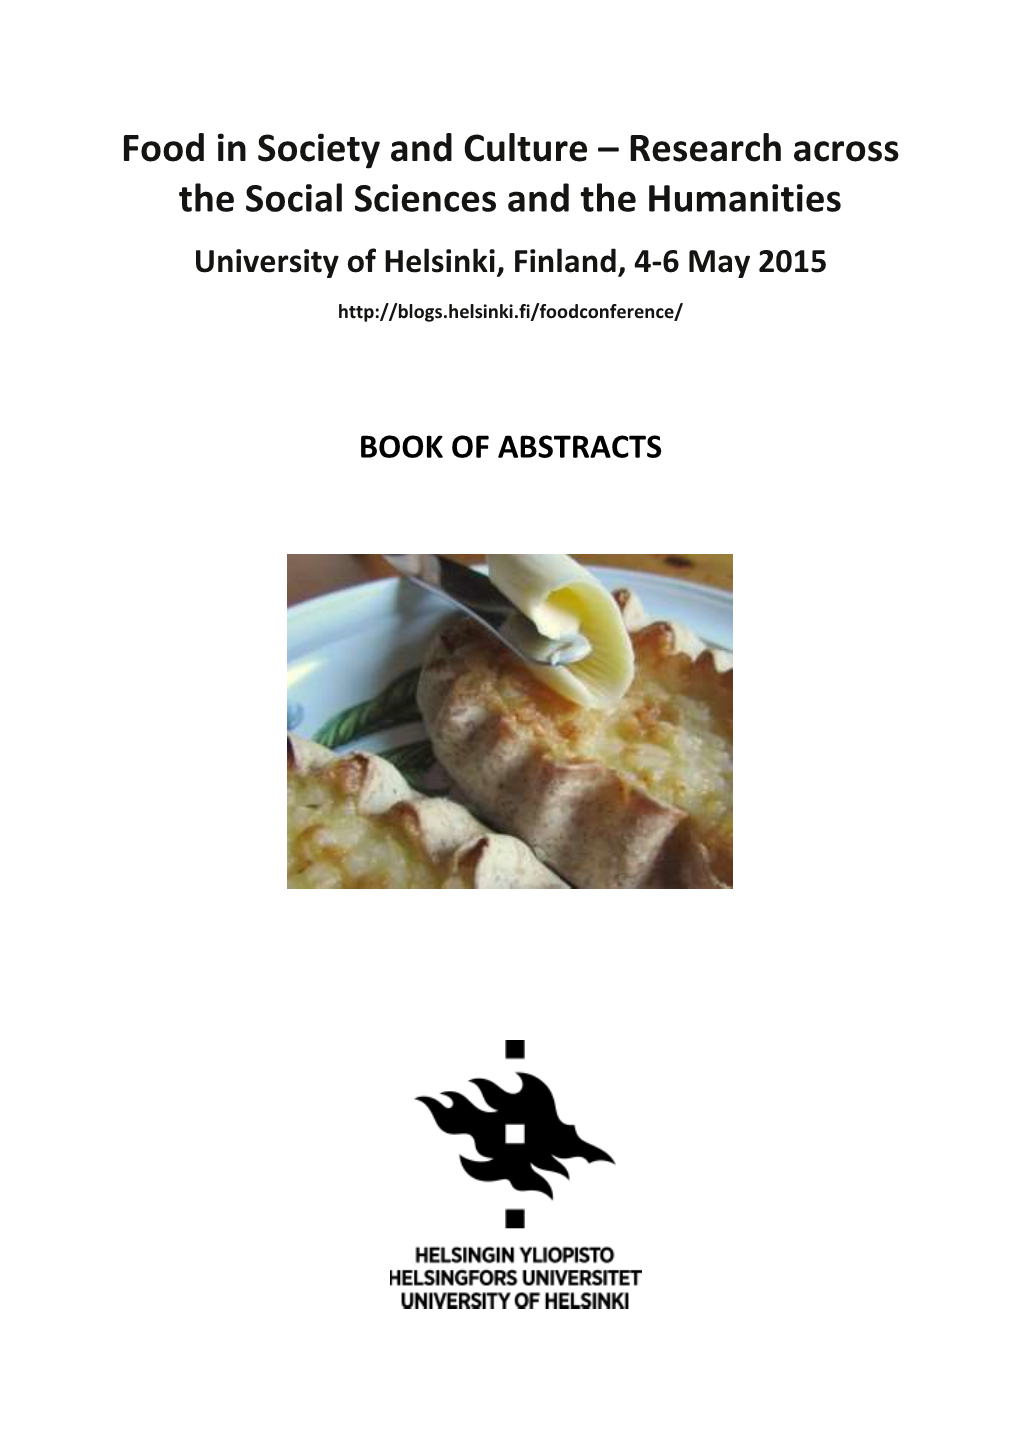 Food in Society and Culture – Research Across the Social Sciences and the Humanities University of Helsinki, Finland, 4-6 May 2015